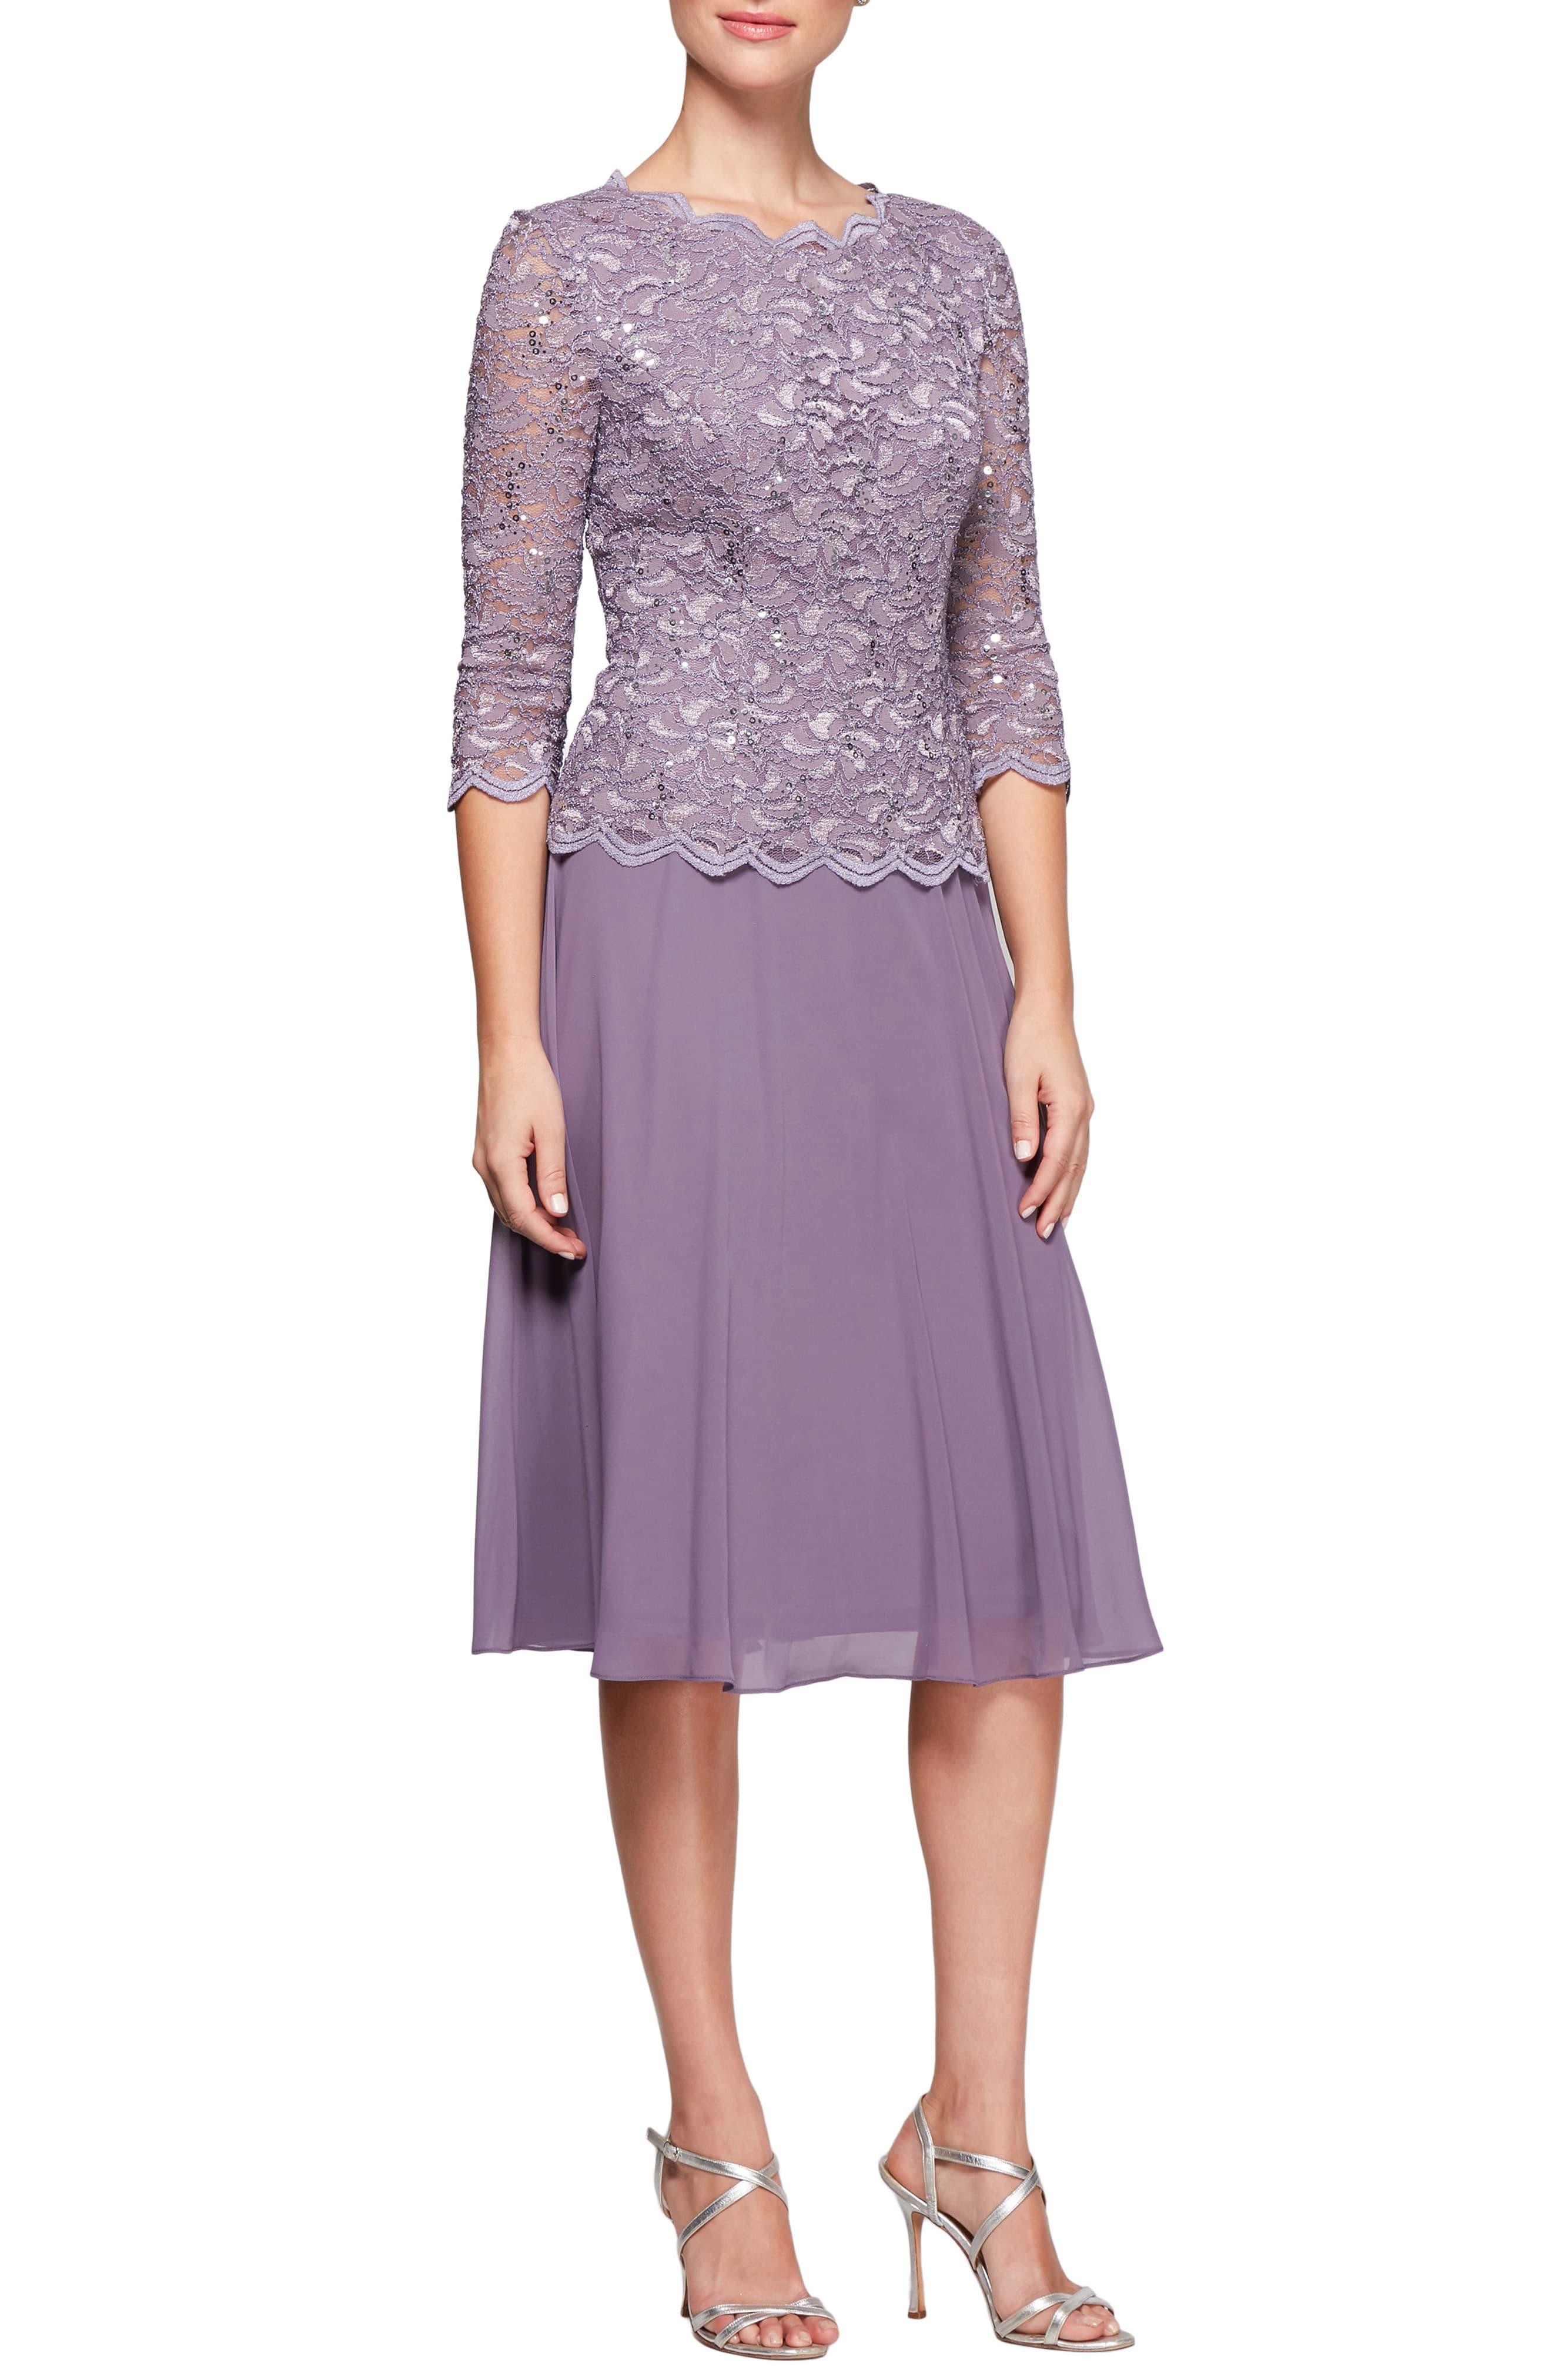 Alex Evenings Lace Mock Two-piece Cocktail Dress in Purple - Save 43% ...